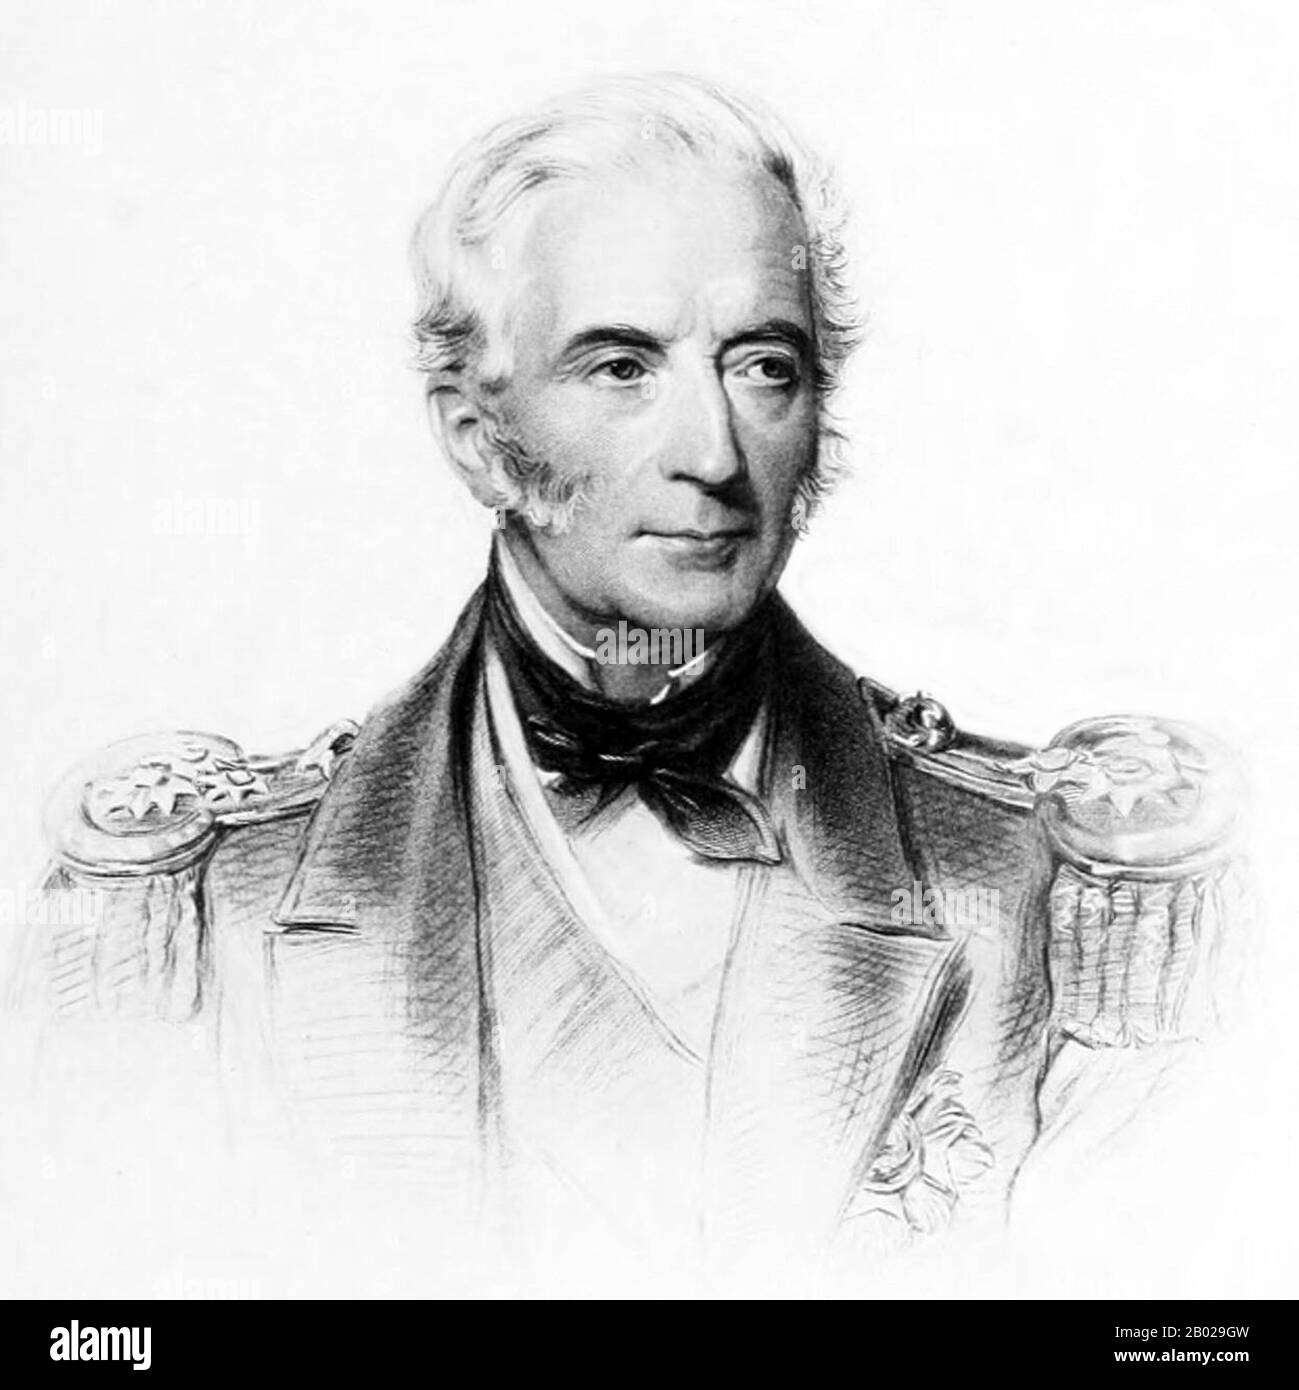 Born the third son of Admiral Sir Michael Seymour, 1st Baronet, Michael Seymour entered the Royal Navy in 1813.  He was made Lieutenant in 1822, Commander in 1824 and was posted Captain in 1826. From 1833 to 1835 he was captain of the survey ship HMS Challenger, and was wrecked in her off the coast of Chile. In 1841 he was given command of HMS Britannia and then of HMS Powerful. In 1845 he took over HMS Vindictive.  From 1851 to 1854 he was Commodore Superintendent of Devonport Dockyard. In 1854 he served under Sir Charles Napier in the Baltic during the Crimean War. He was promoted to Rear-Ad Stock Photo